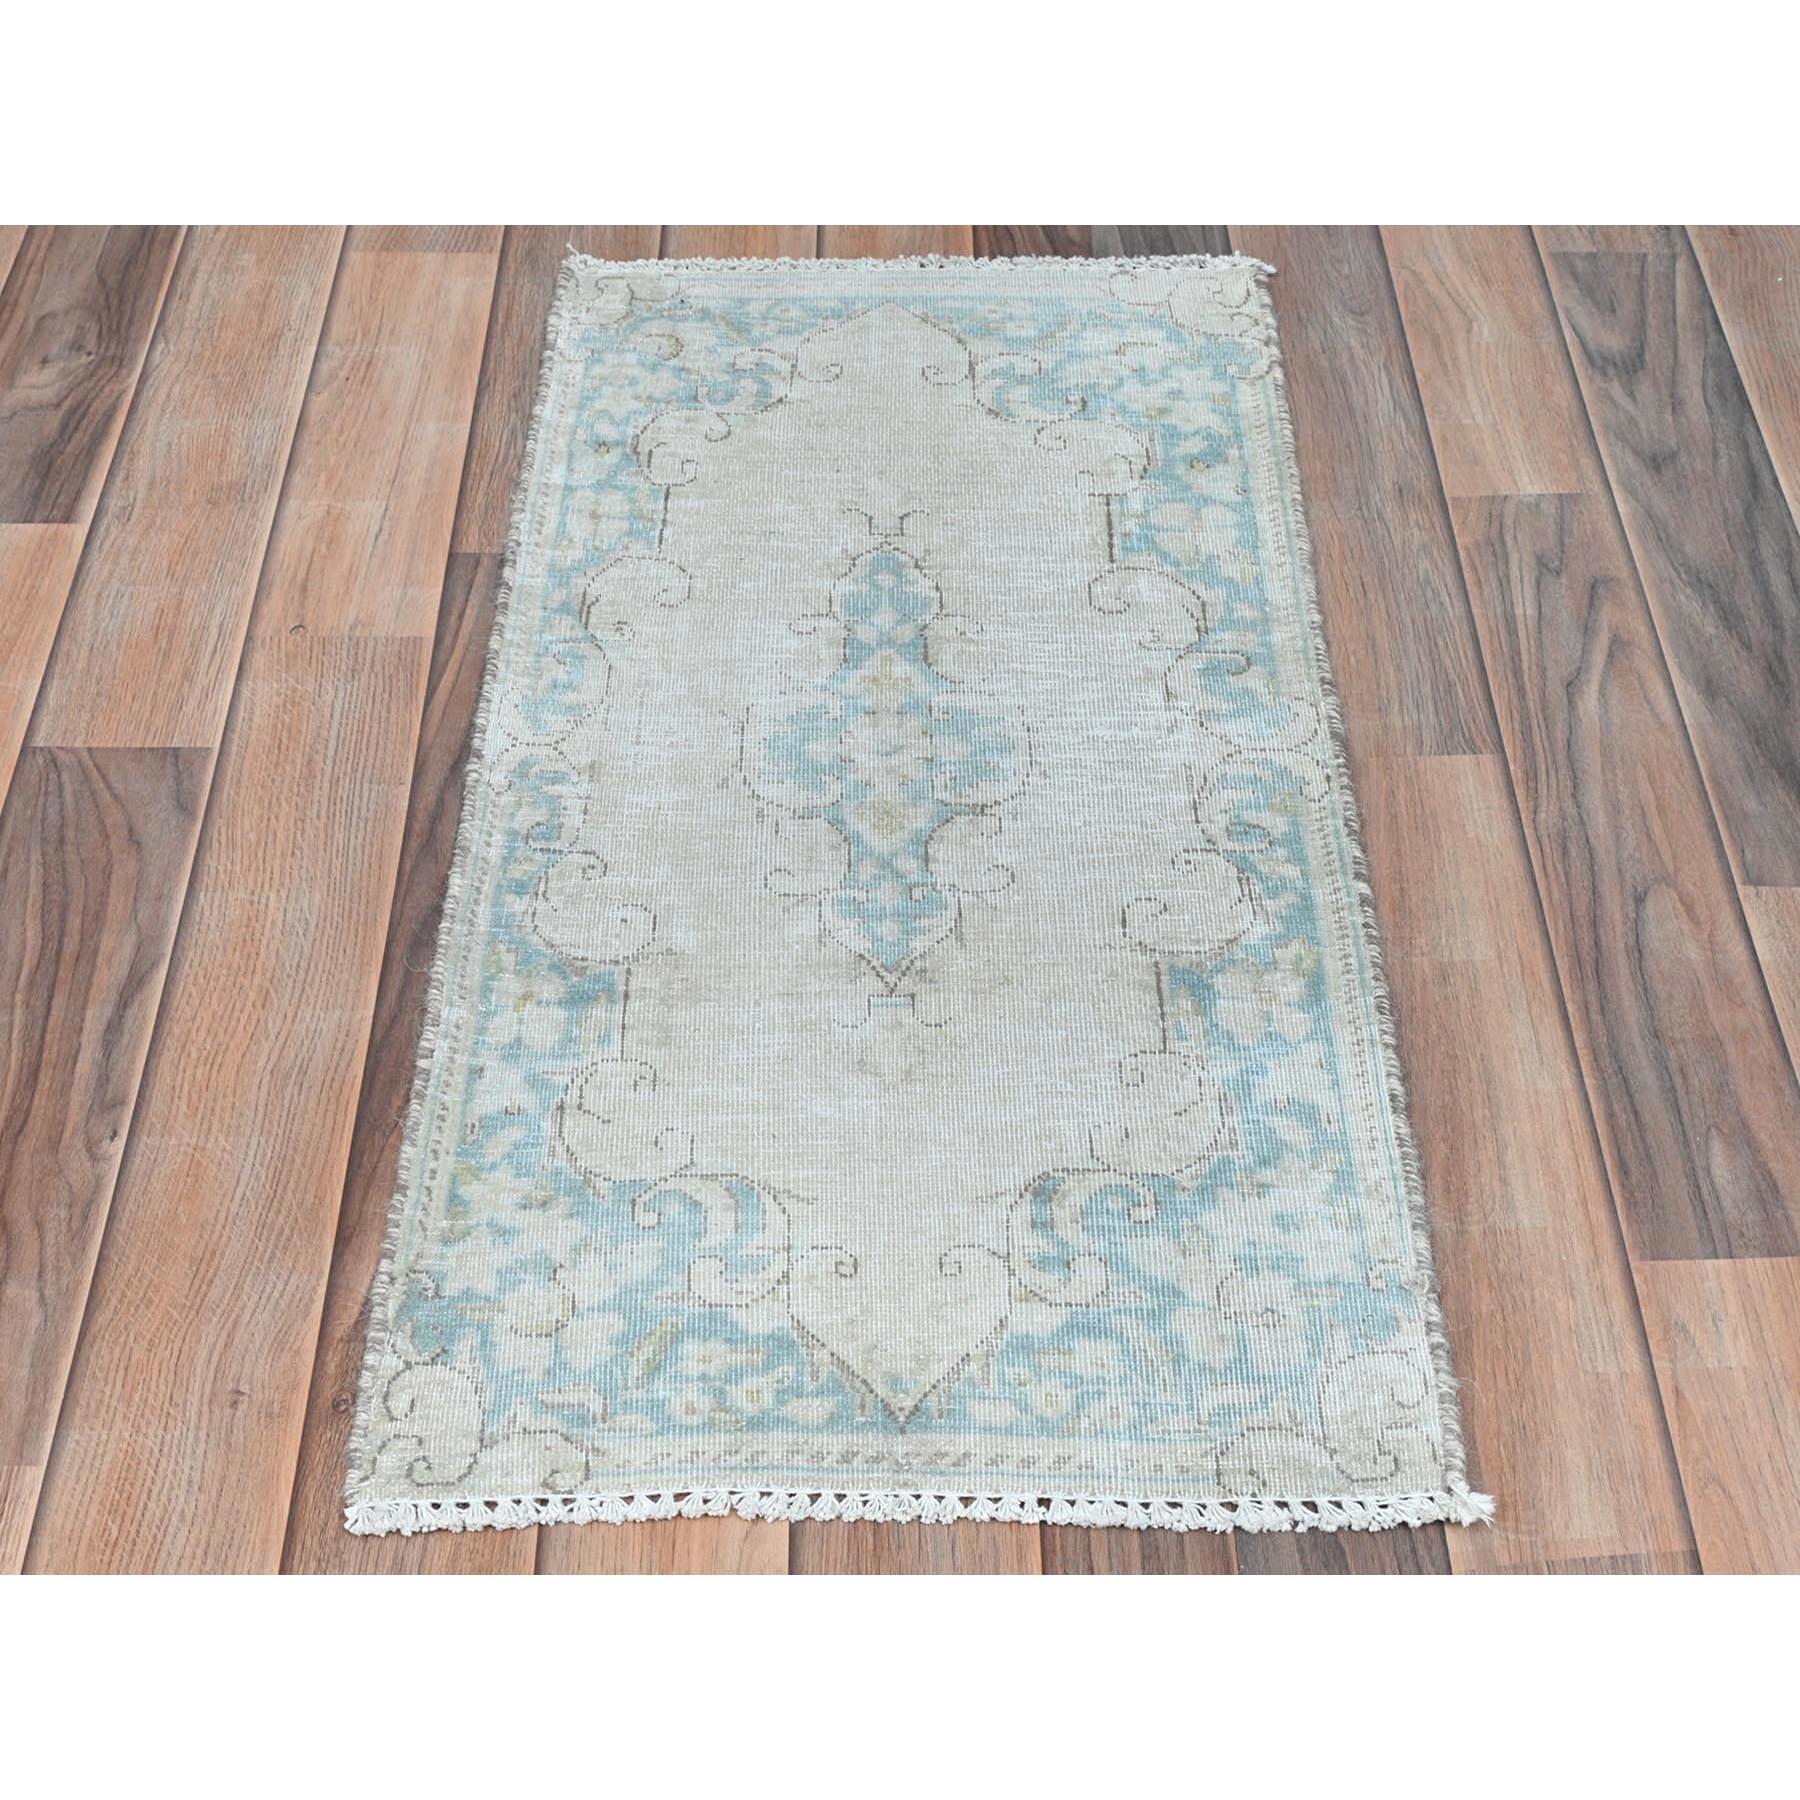 This fabulous Hand-Knotted carpet has been created and designed for extra strength and durability. This rug has been handcrafted for weeks in the traditional method that is used to make
Exact Rug Size in Feet and Inches : 1'5